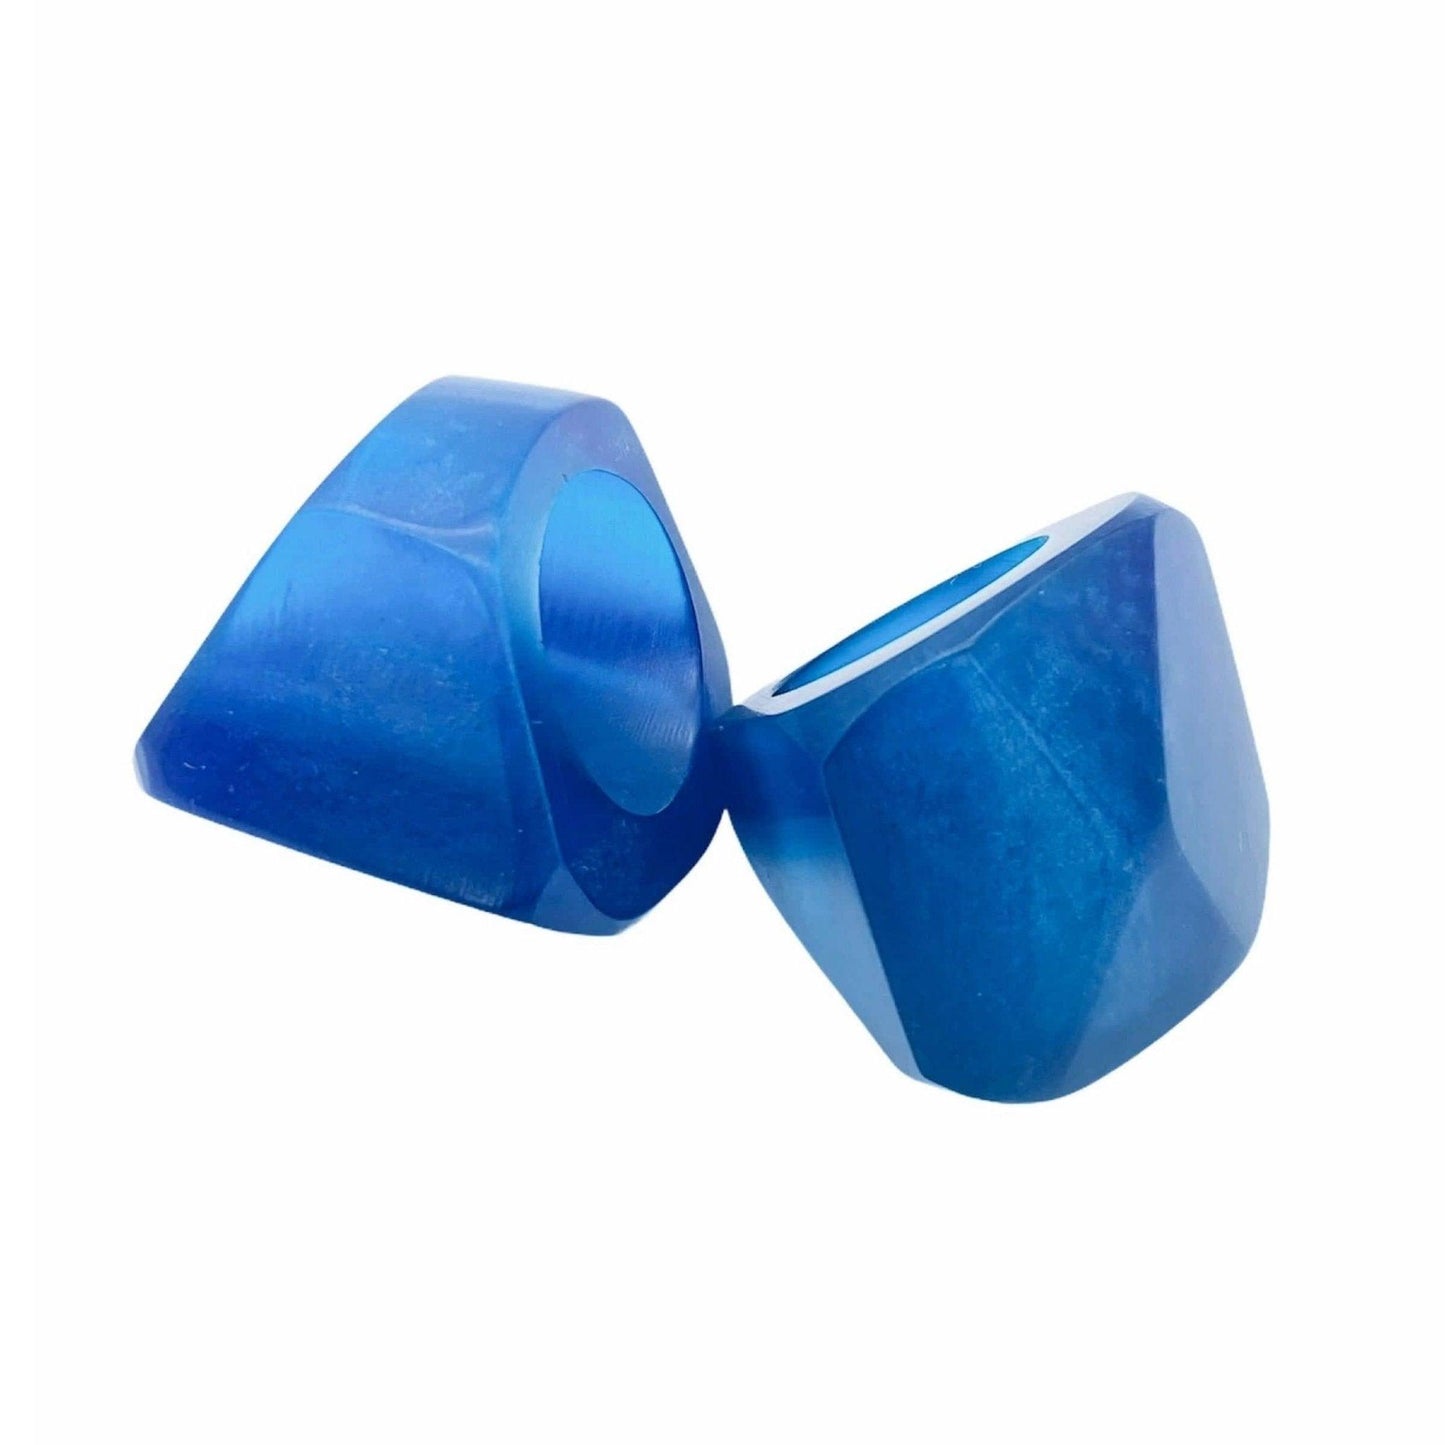 Blue Resin Square Pyramid Shape Modern Cocktail Ring